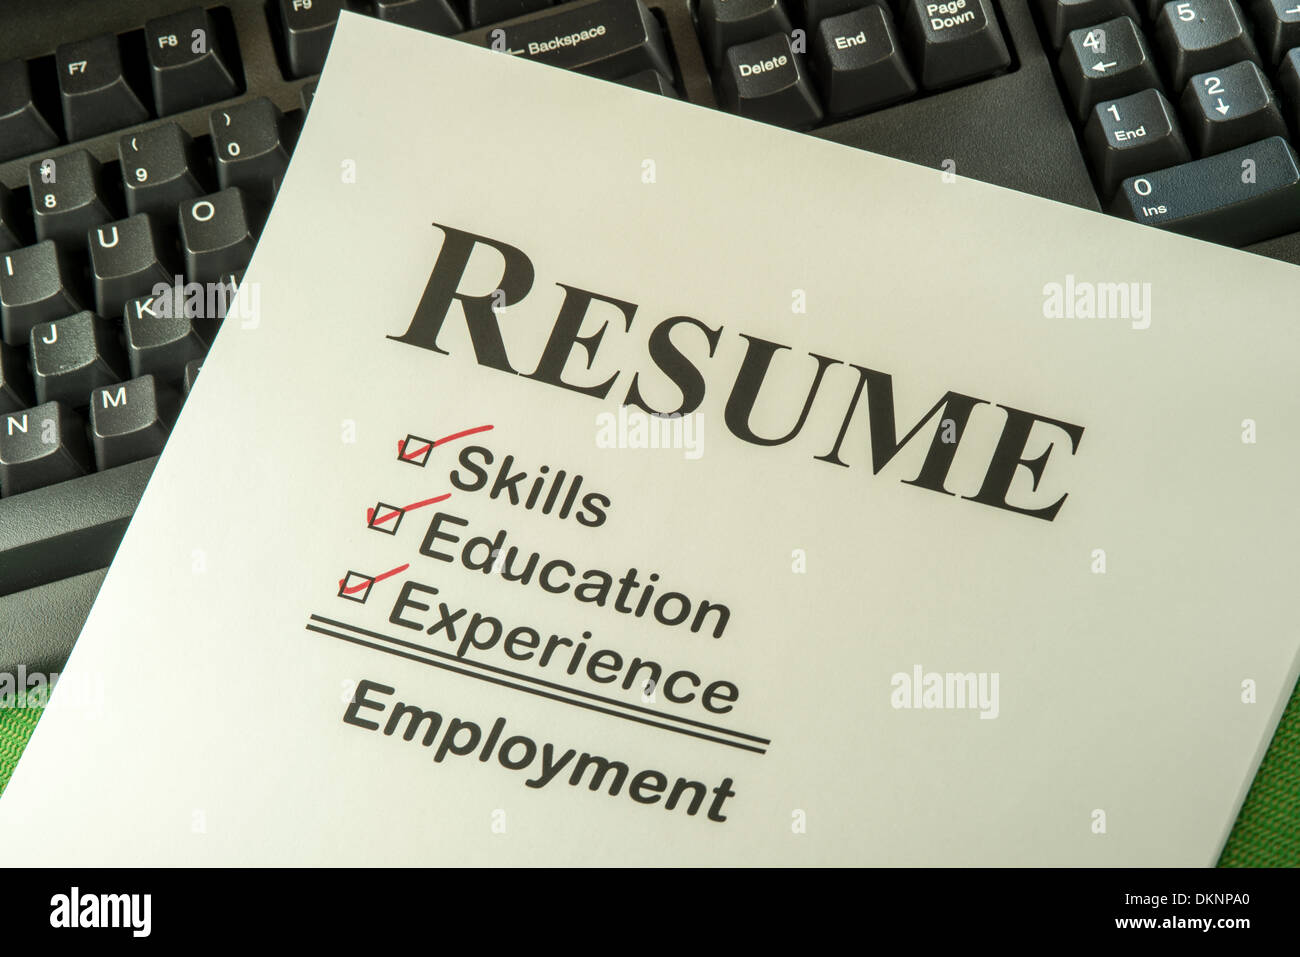 Successful Candidate Resume Requires Skills, Education And Experience To Find Employment Stock Photo